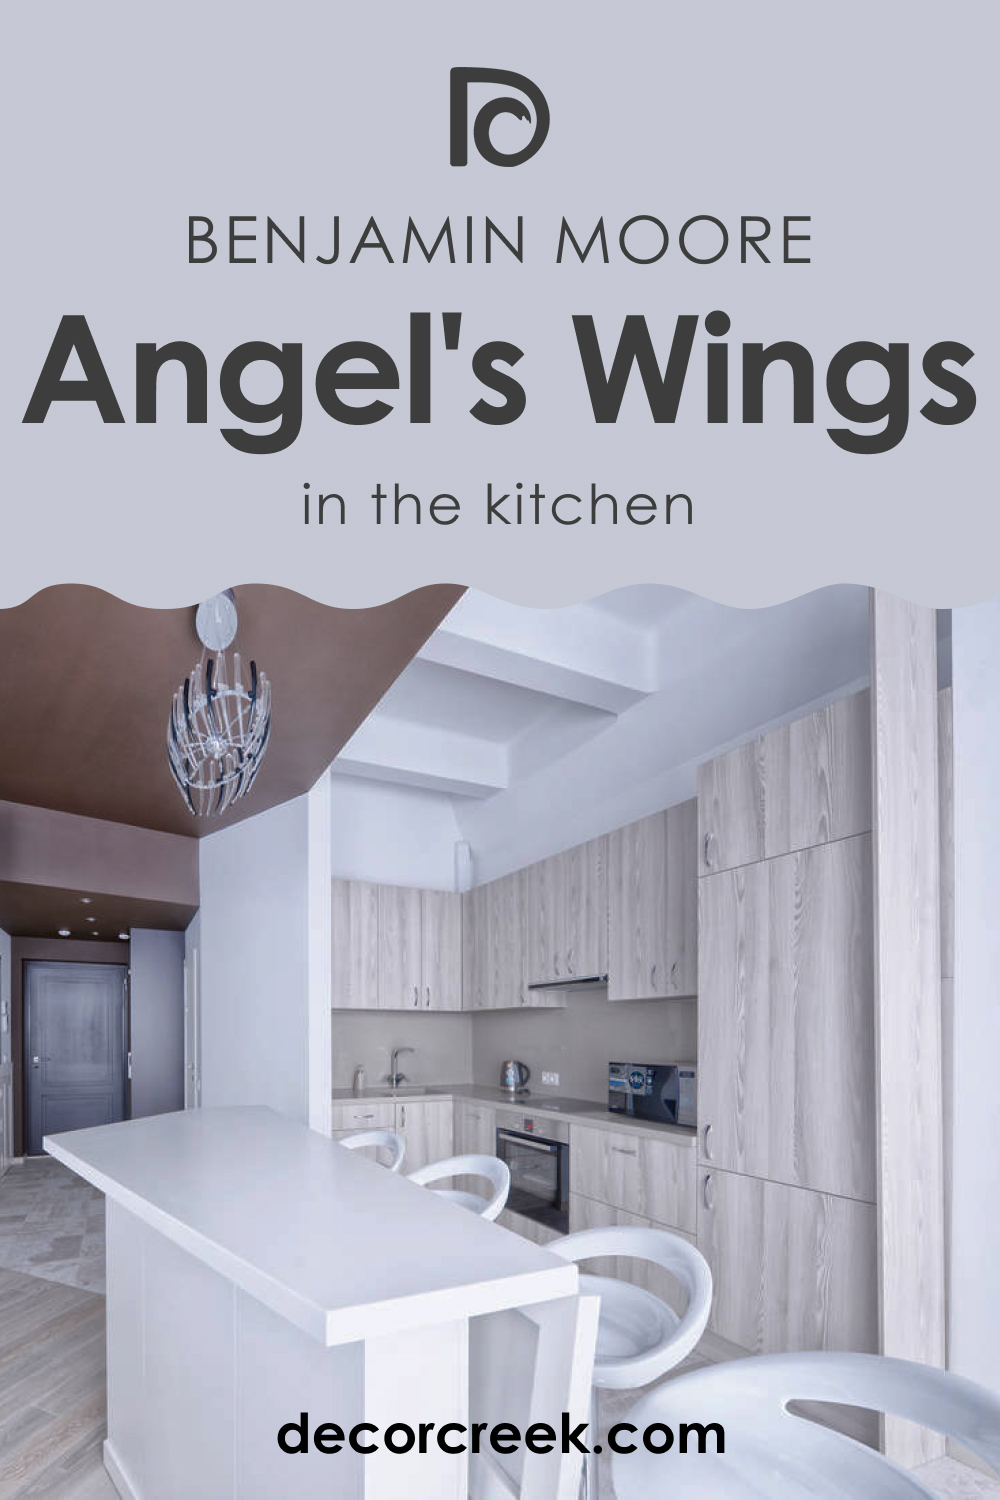 How to Use Angel's Wings 1423 in the Kitchen?